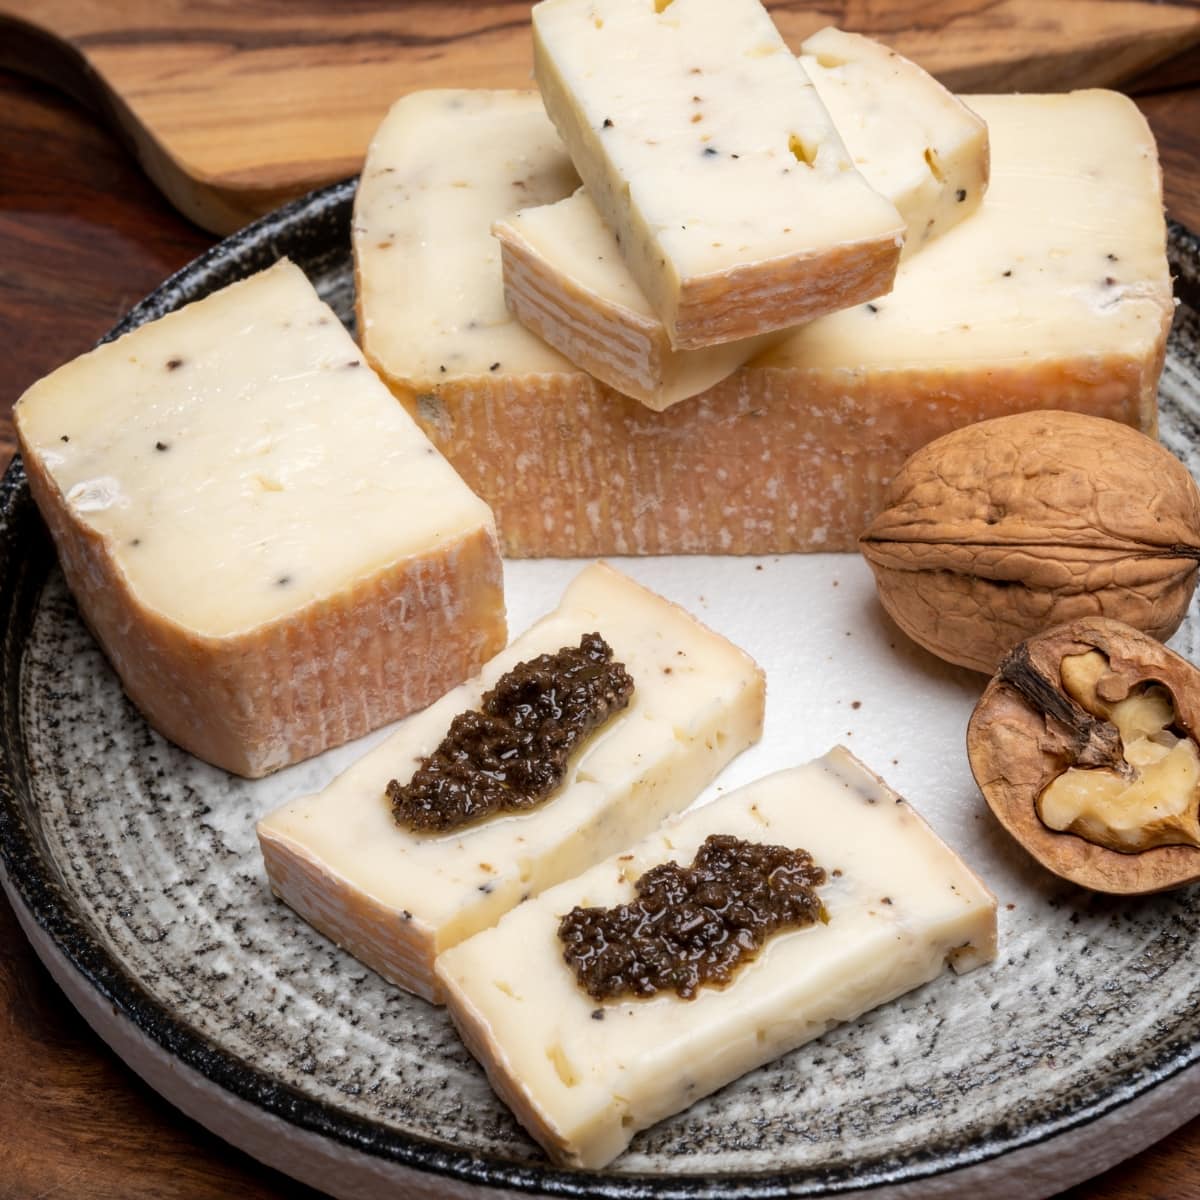 Raw Organic Taleggio Cheese Block and Slices with Walnuts and Tapenade on a Round Cutting Board